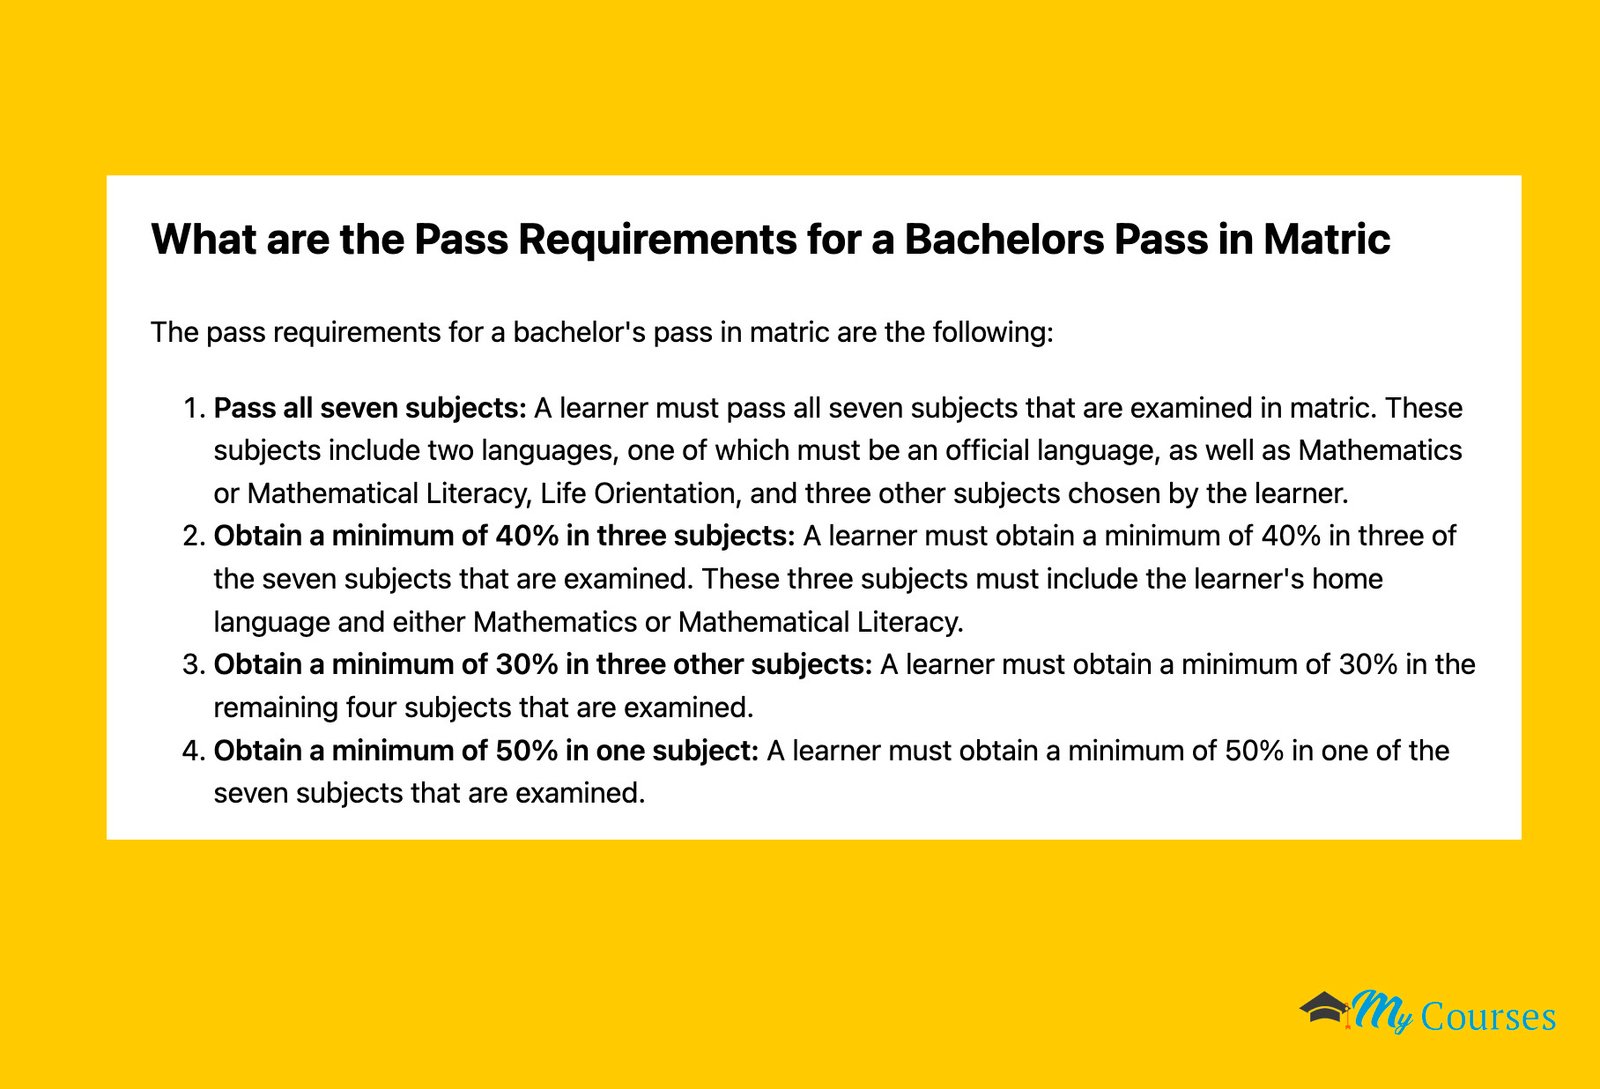 What are the Pass Requirements for a Bachelors Pass in Matric